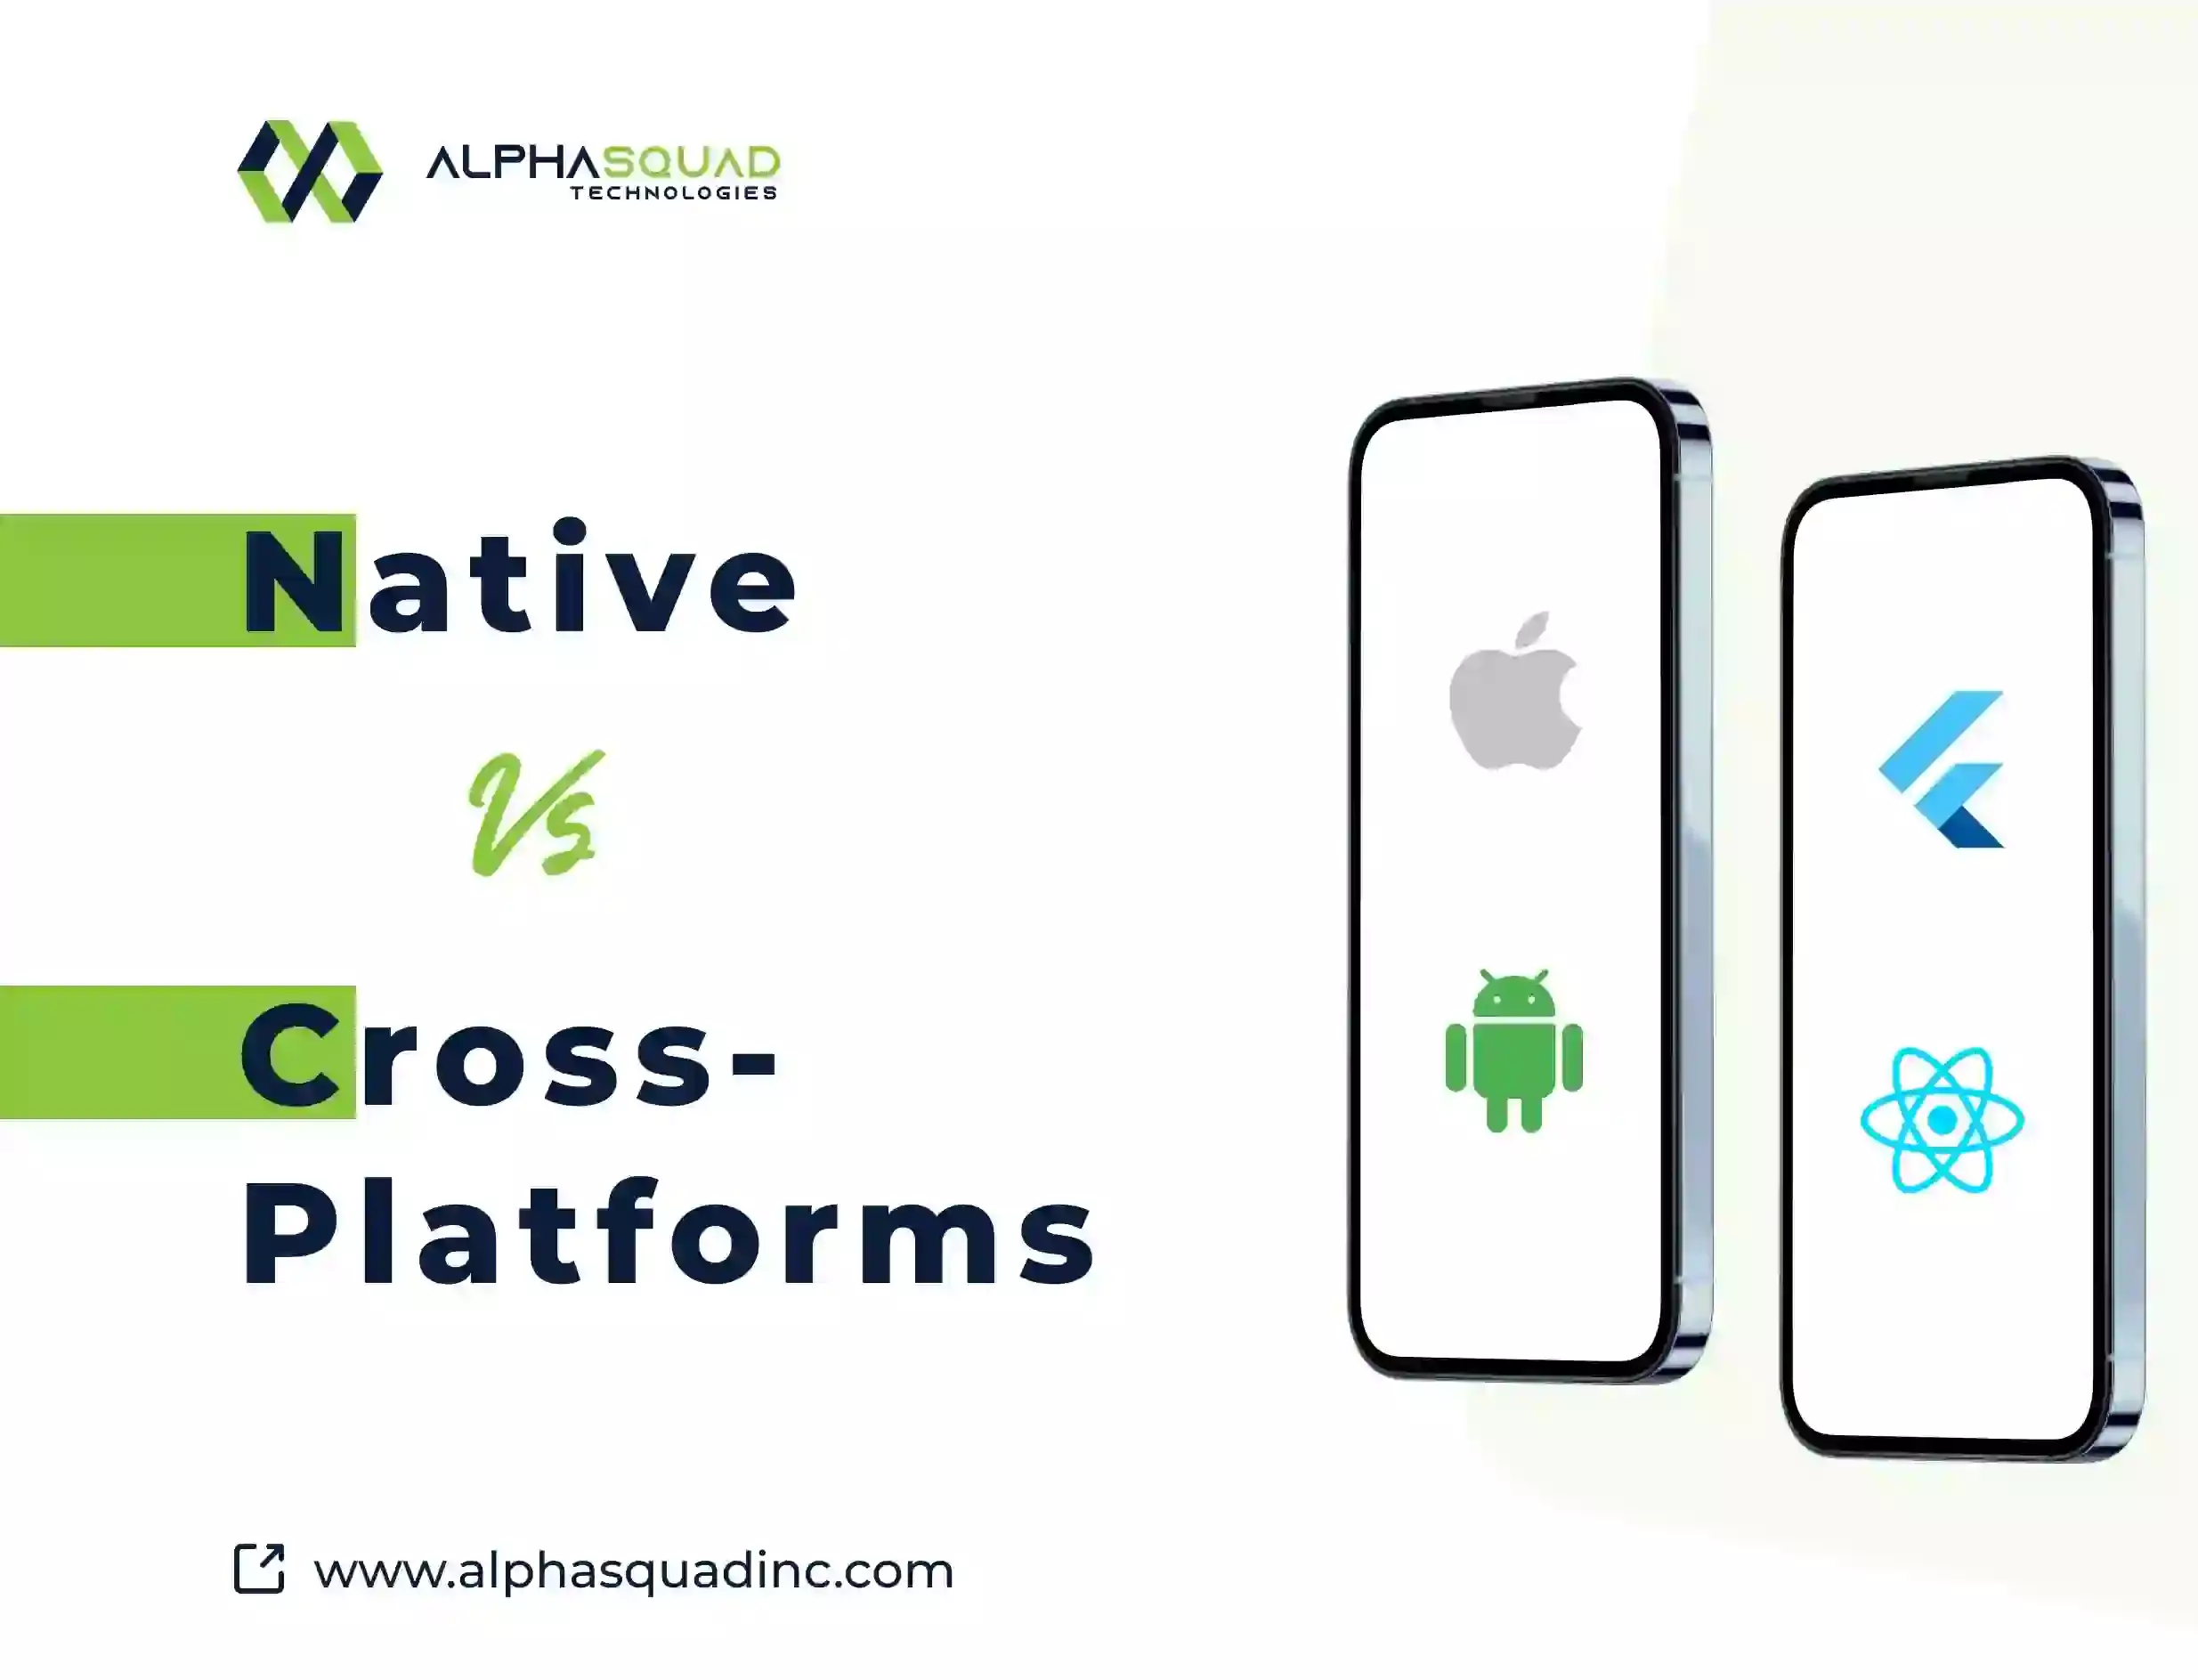 Native Or Cross-platform, What’s More Profitable?